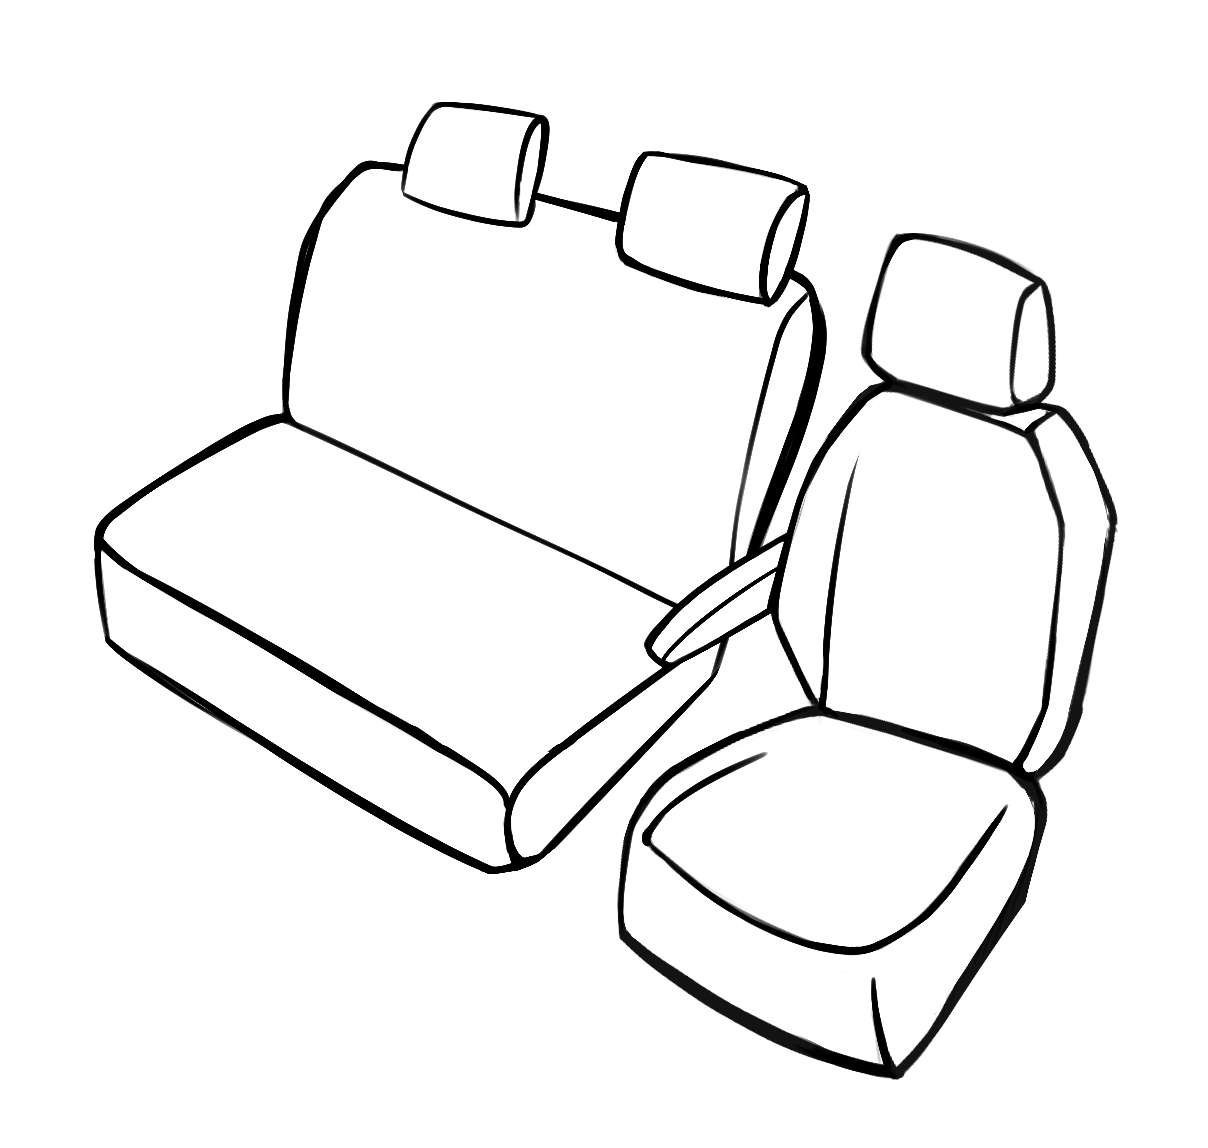 Seat cover made of imitation leather for Mercedes-Benz Viano/Vito, single seat with armrest and double bench